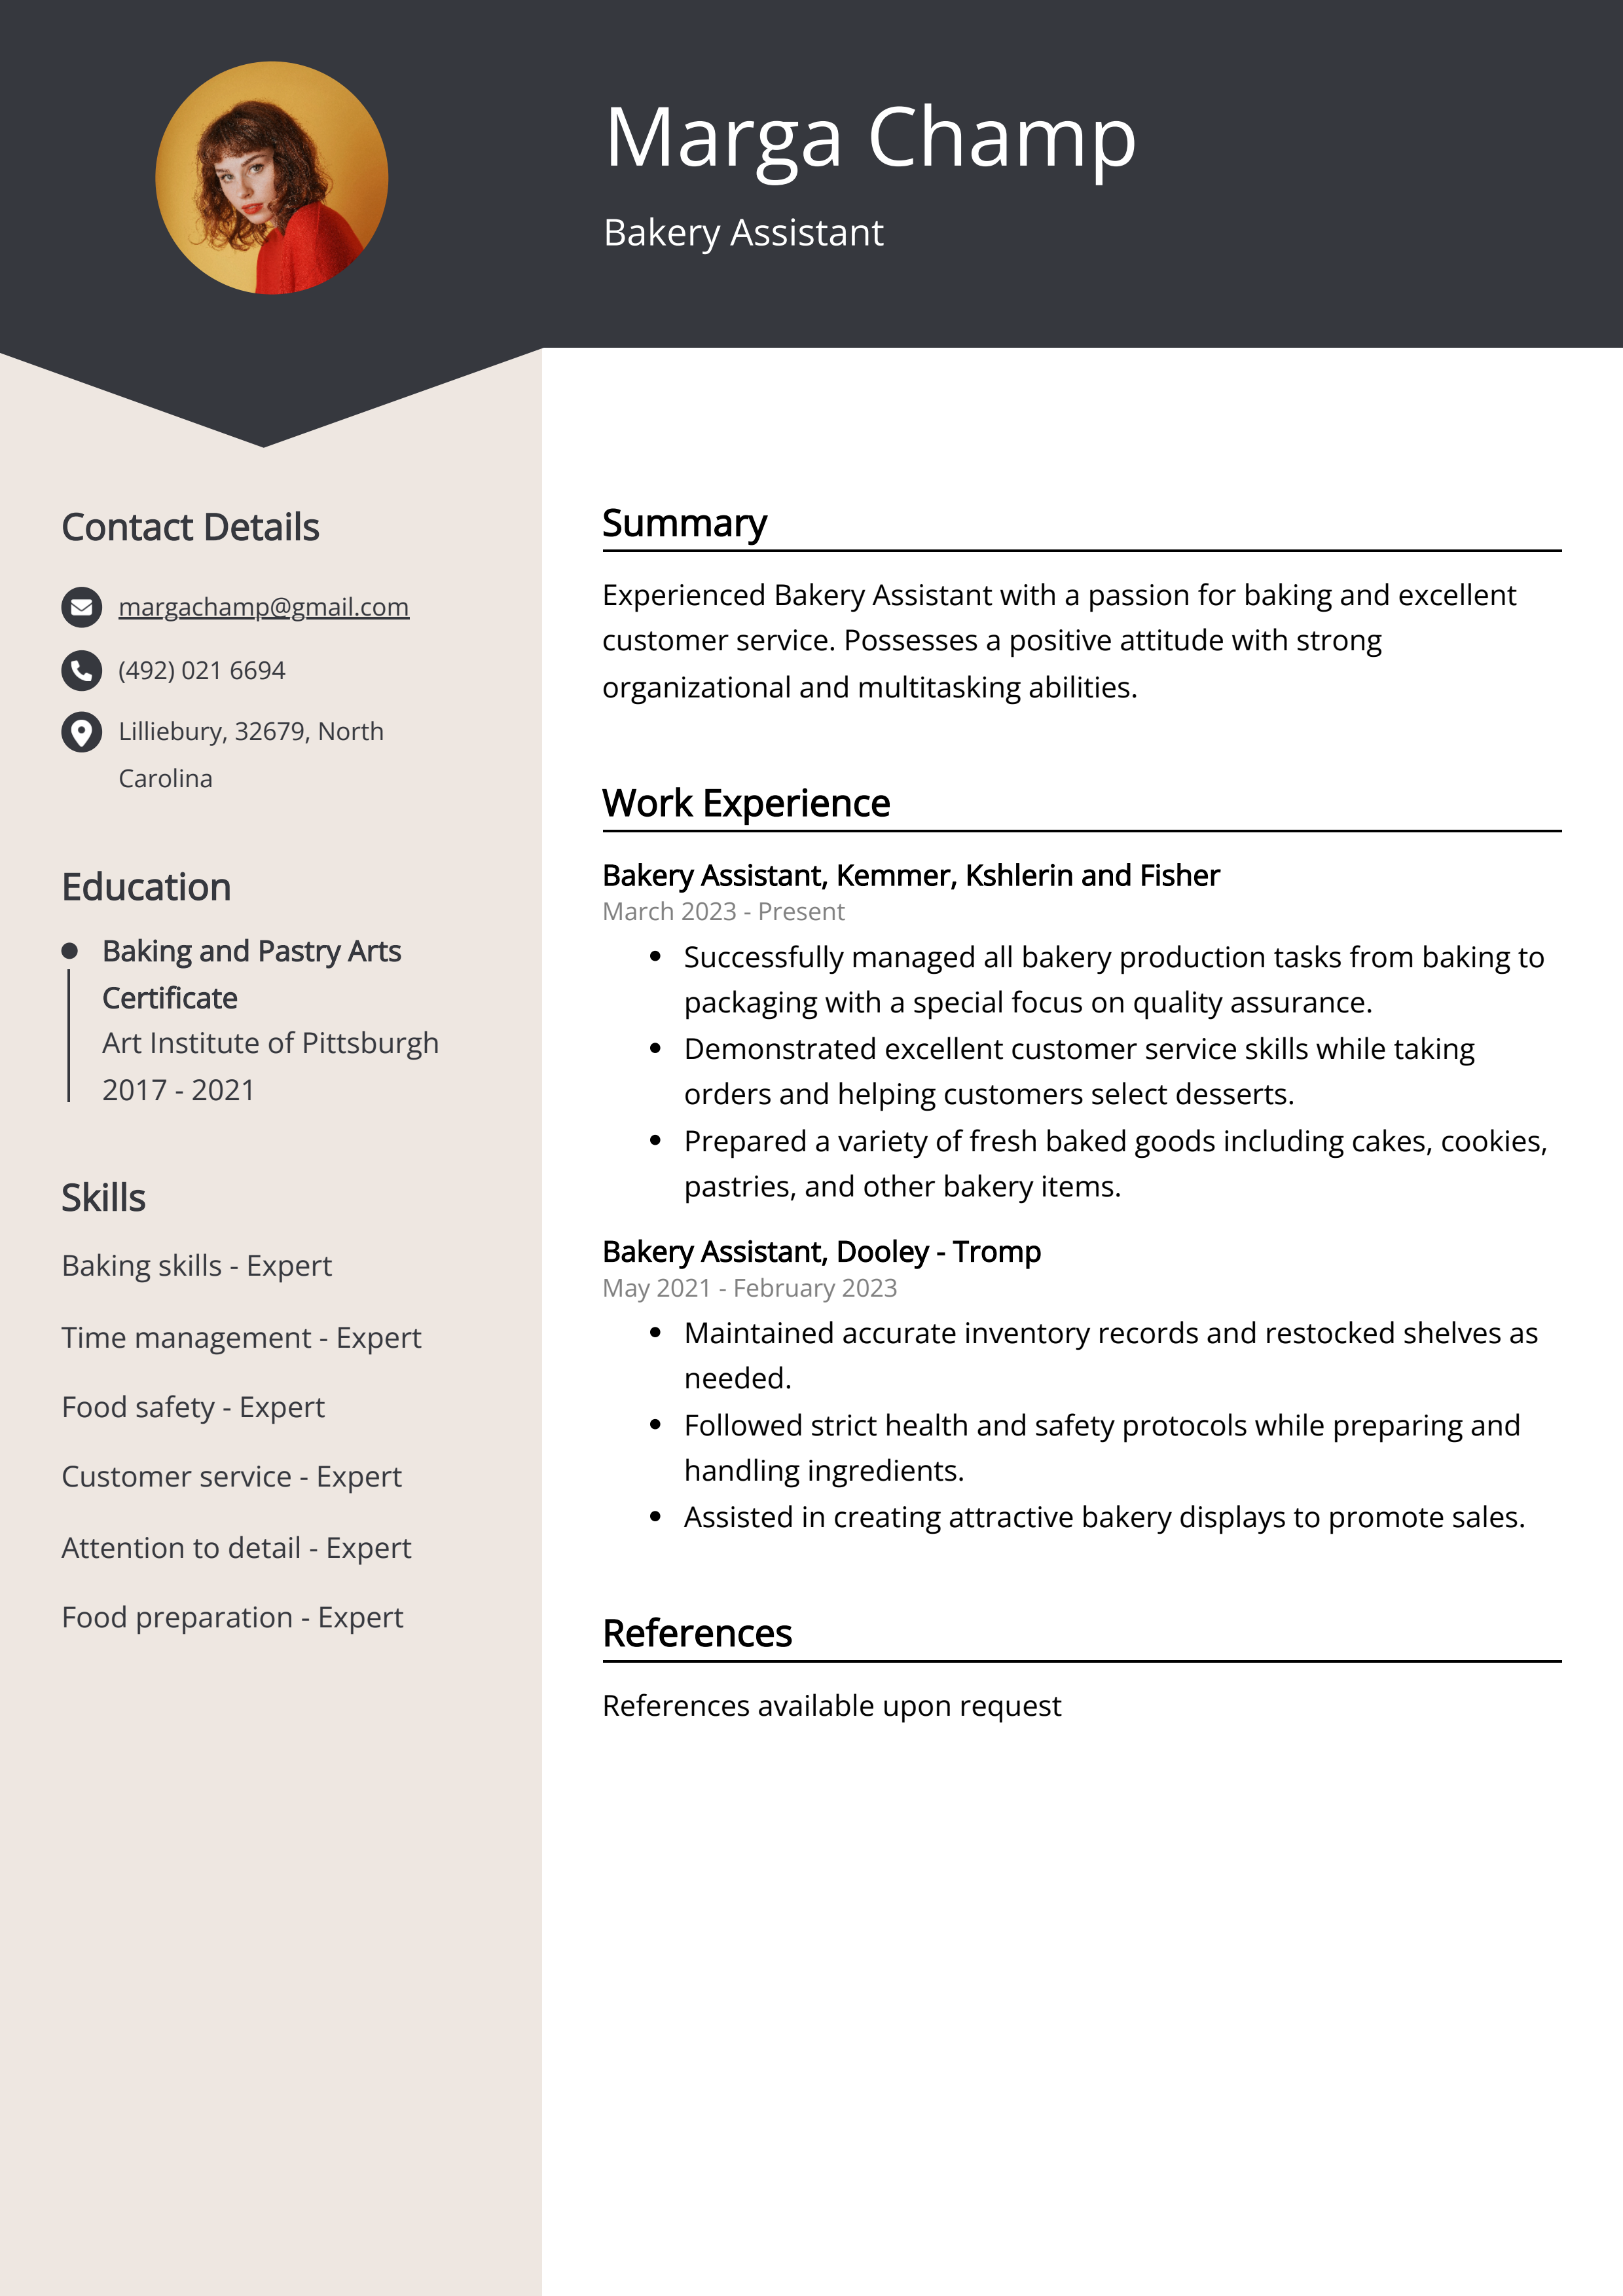 Bakery Assistant Resume Example